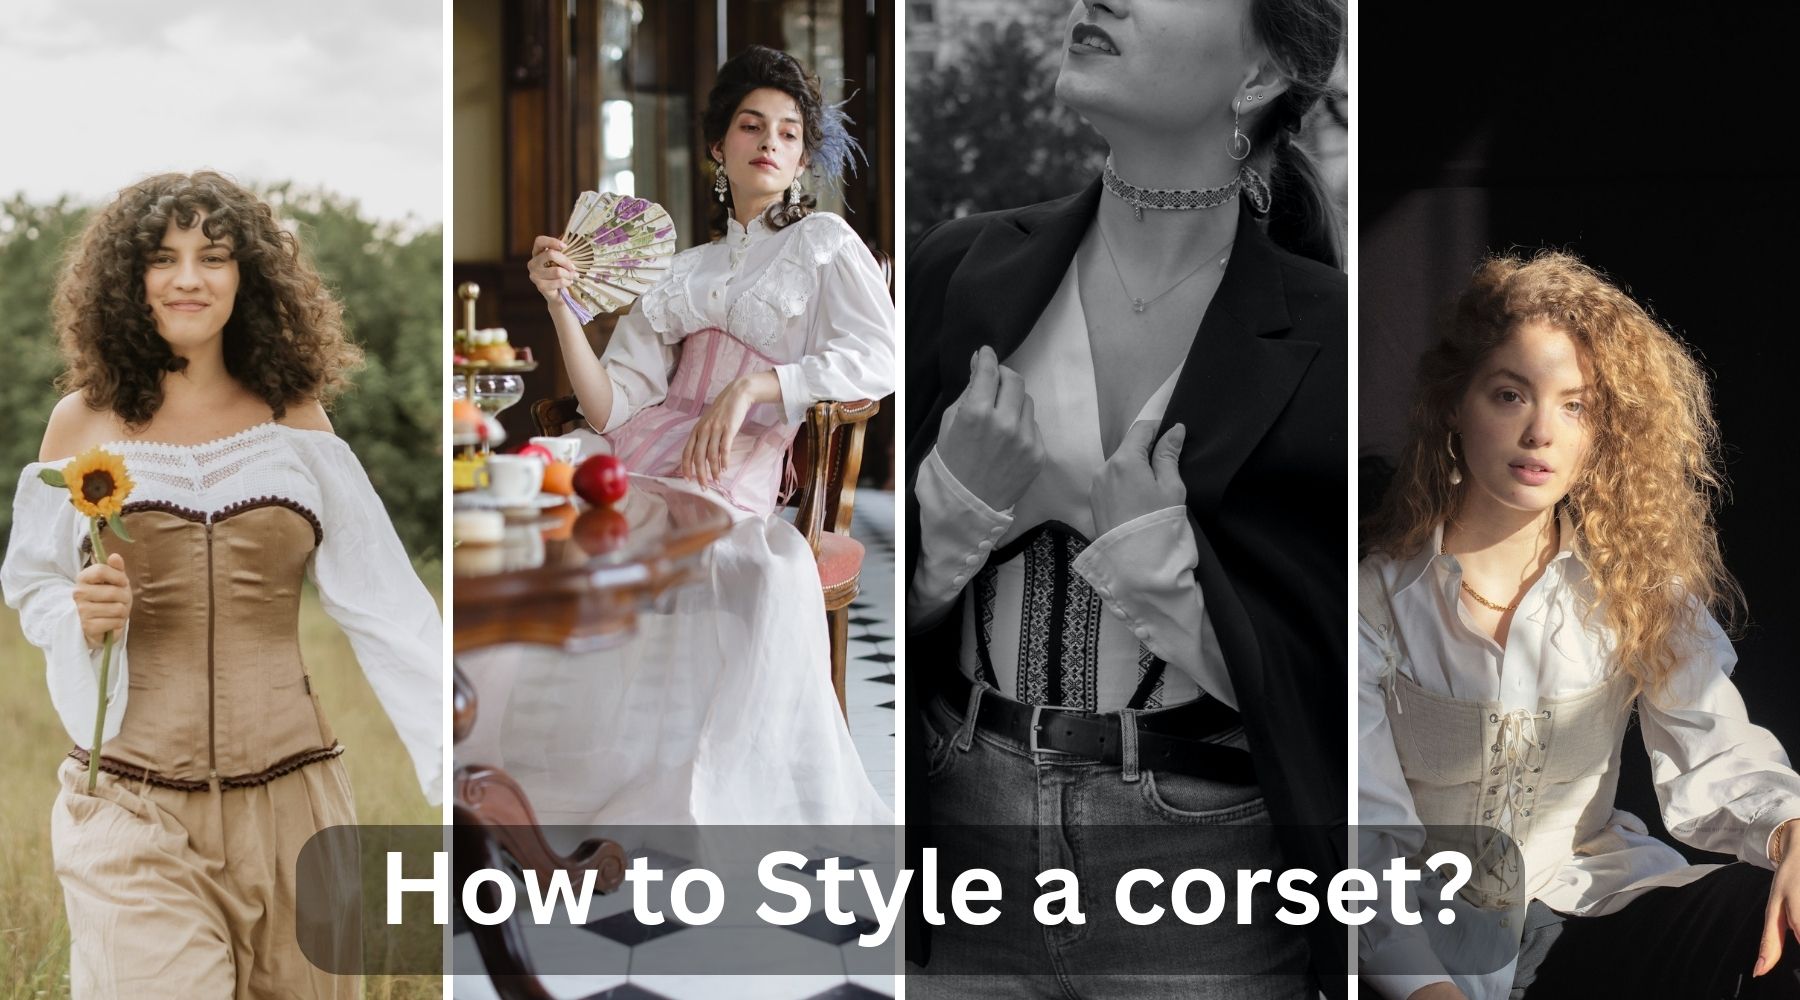 How close together are you wearing your corset dress?